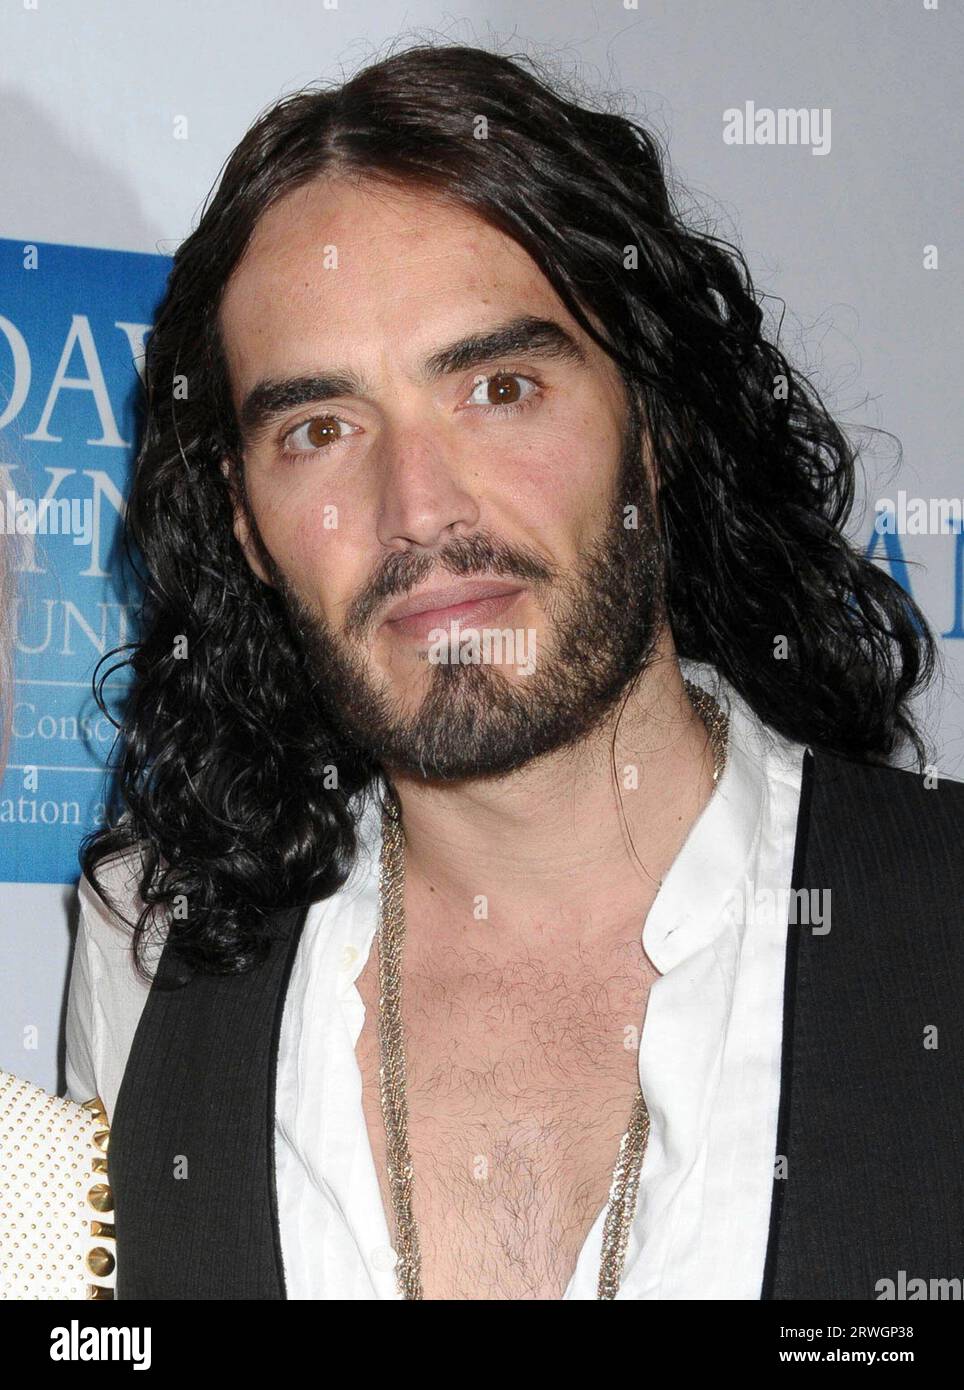 SEPTEMBER 18th 2023: Russell Brand cancels scheduled comedy show dates after being accused by multiple women of rape, sexual assault and emotional abuse in incidents that allegedly occurred between 2006 and 2013. - File Photo by: zz/Galaxy/STAR MAX/IPx 2011 12/3/11 Russell Brand at the 3rd Annual Change Begins Within Benefit held on December 3, 2011 in Los Angeles, California. Stock Photo